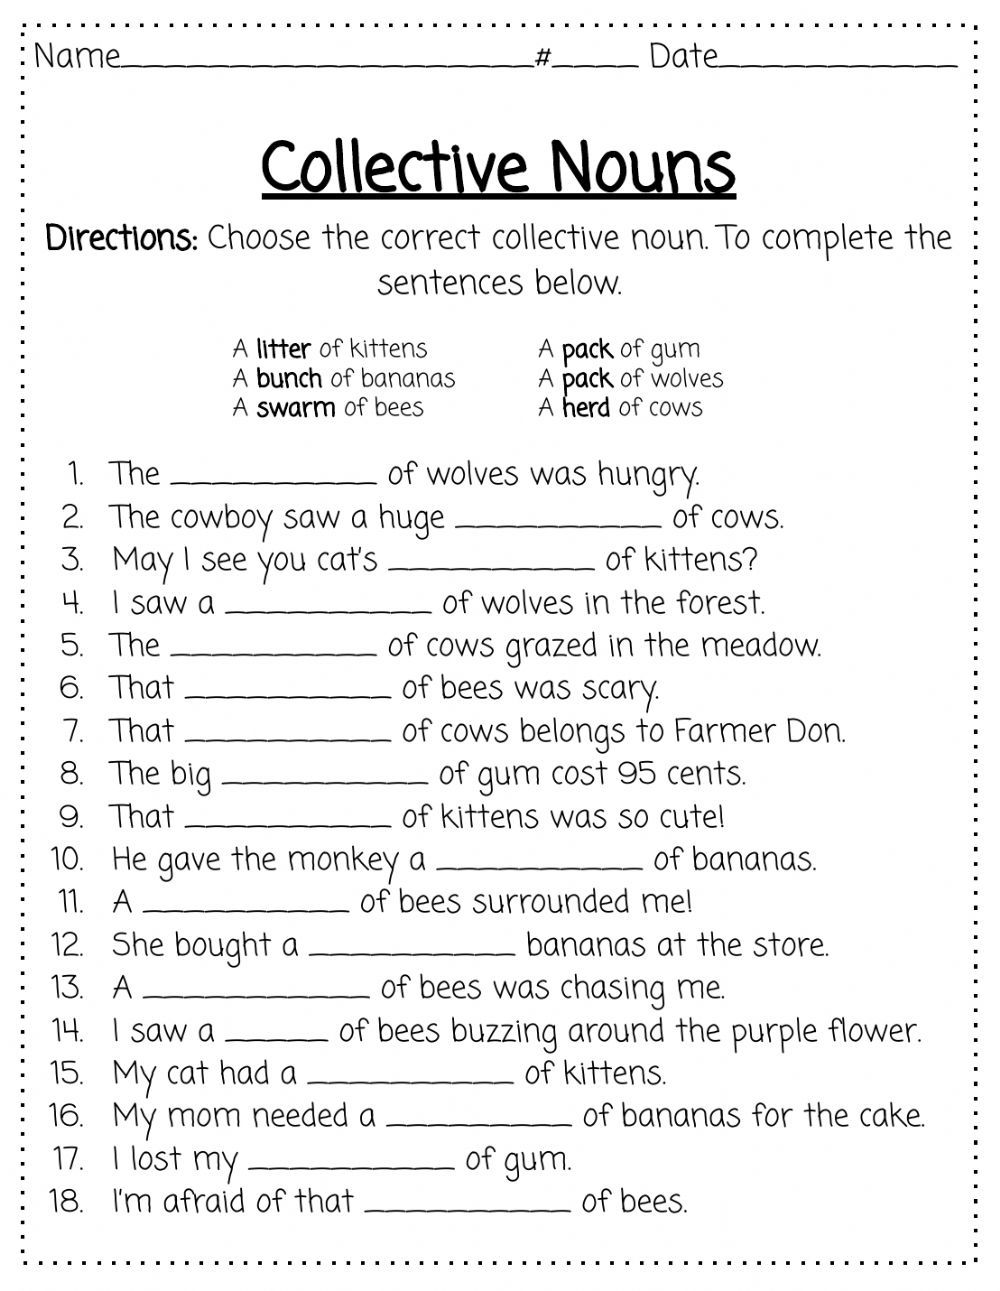 Collective Nouns activity for 2